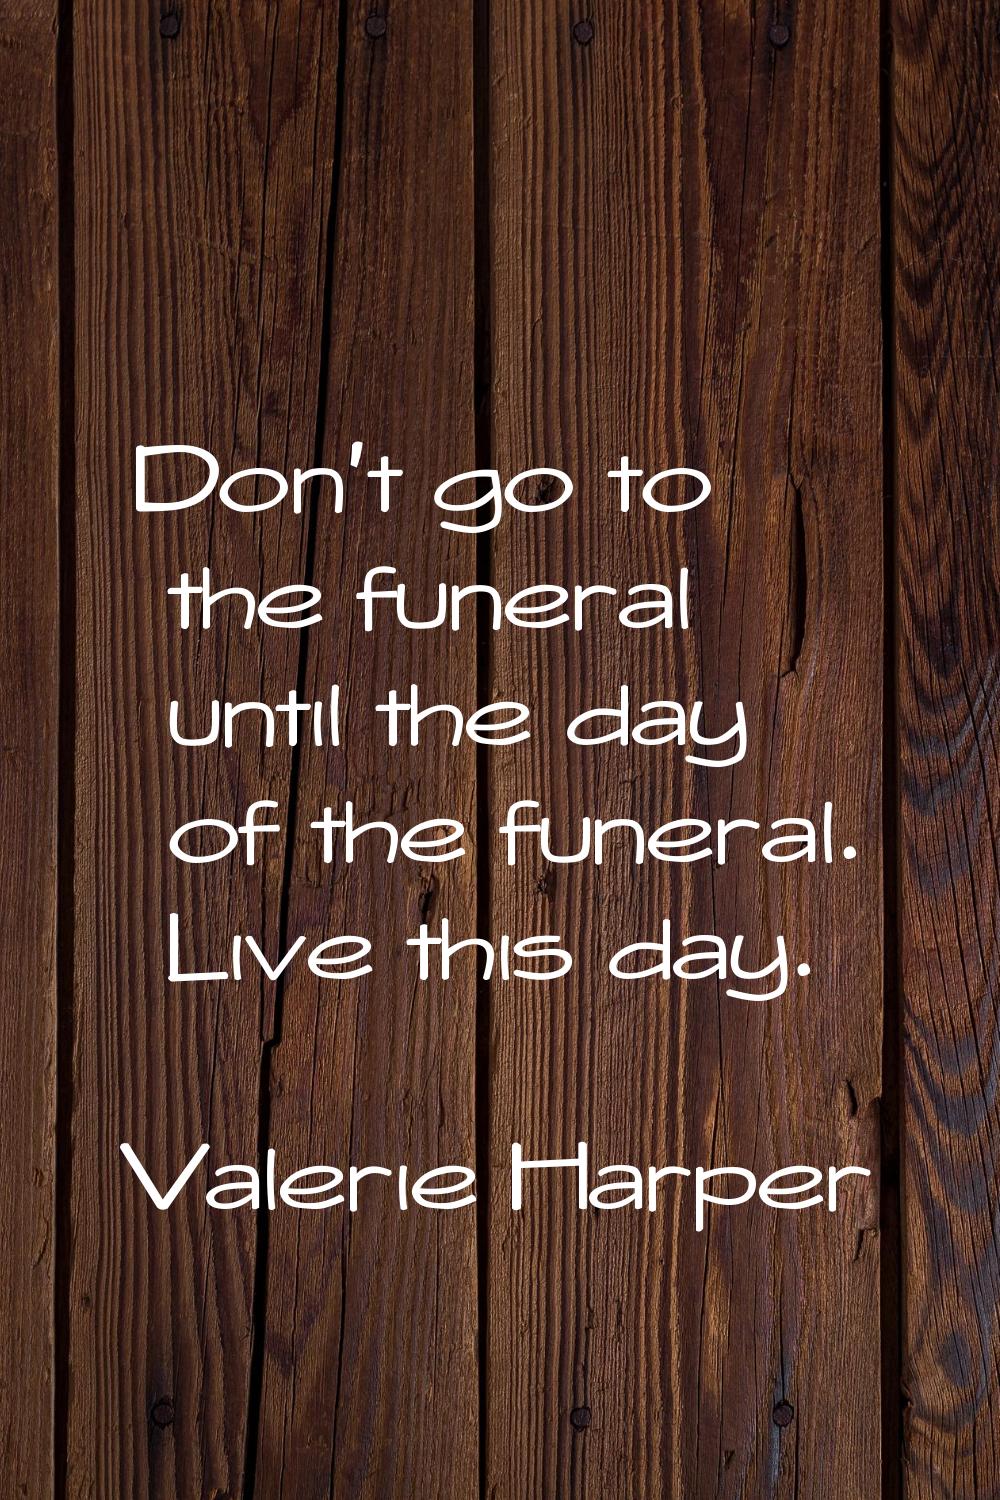 Don't go to the funeral until the day of the funeral. Live this day.